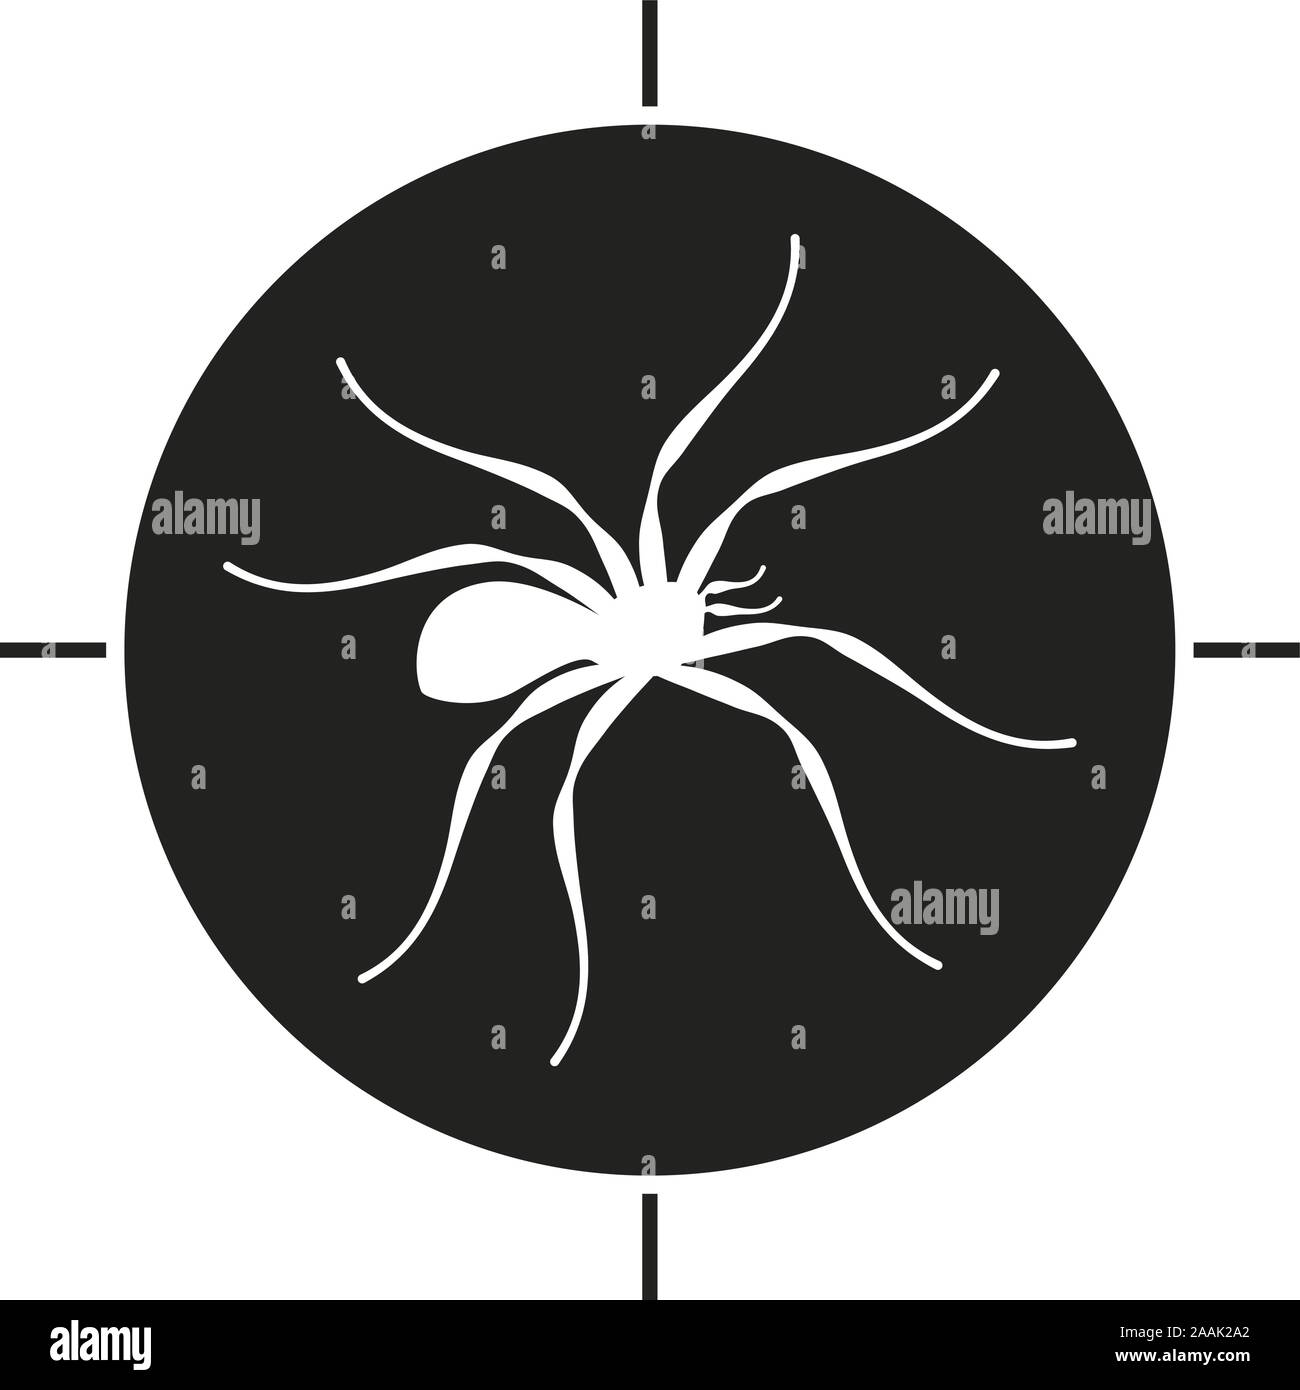 Spider icon over target. Simple and flat illustration in black and white. Isolated. Vector. Stock Vector